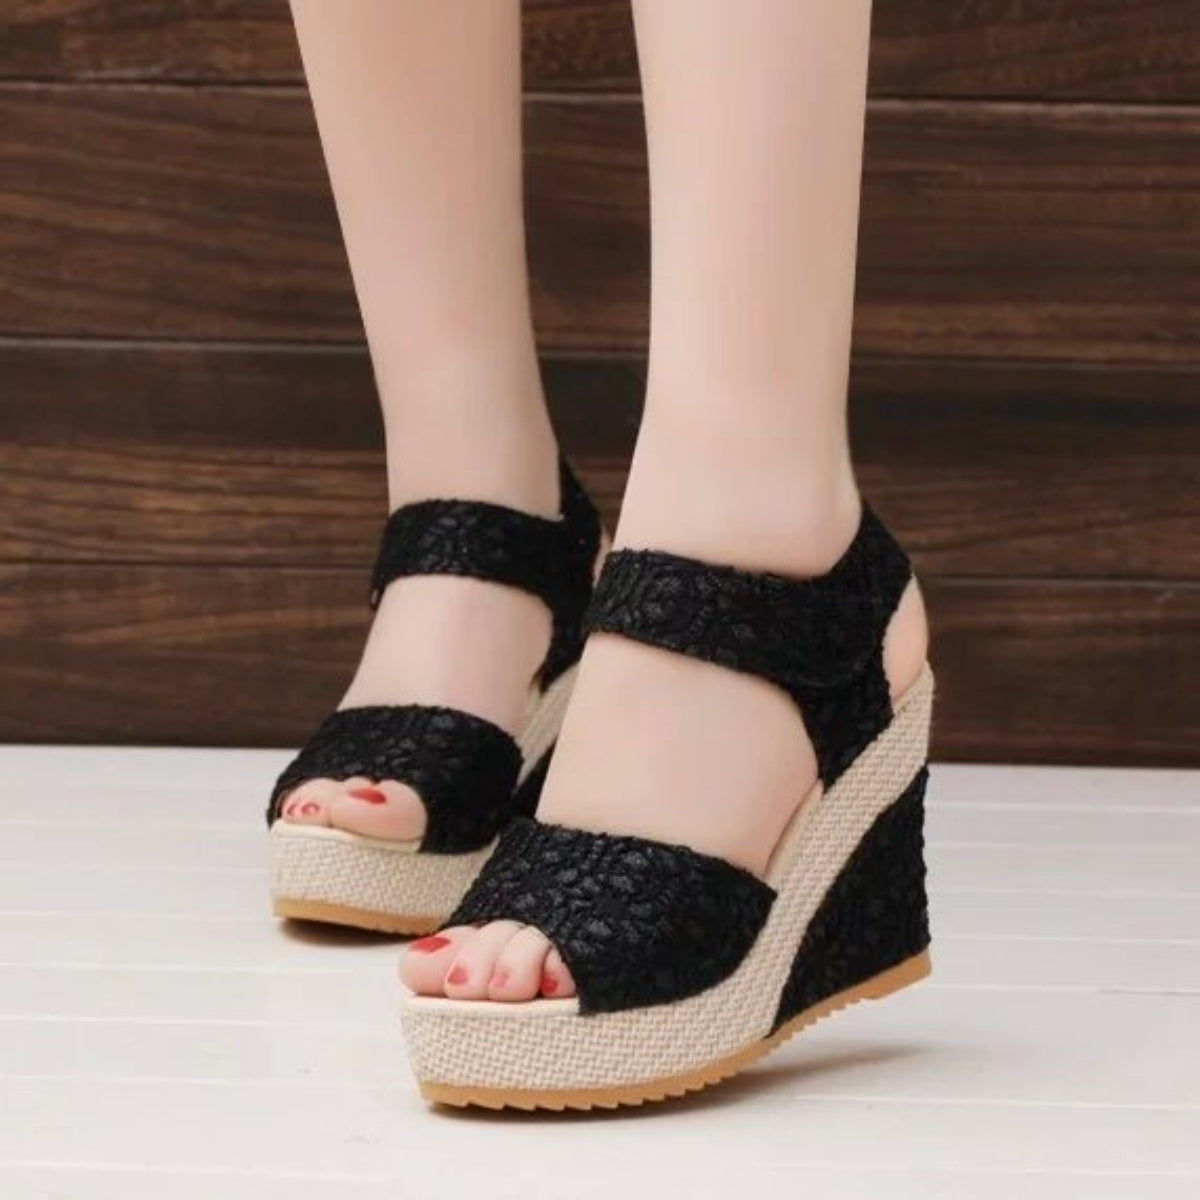 Lace Detail Open Toe High Heel Sandals Accessories for women